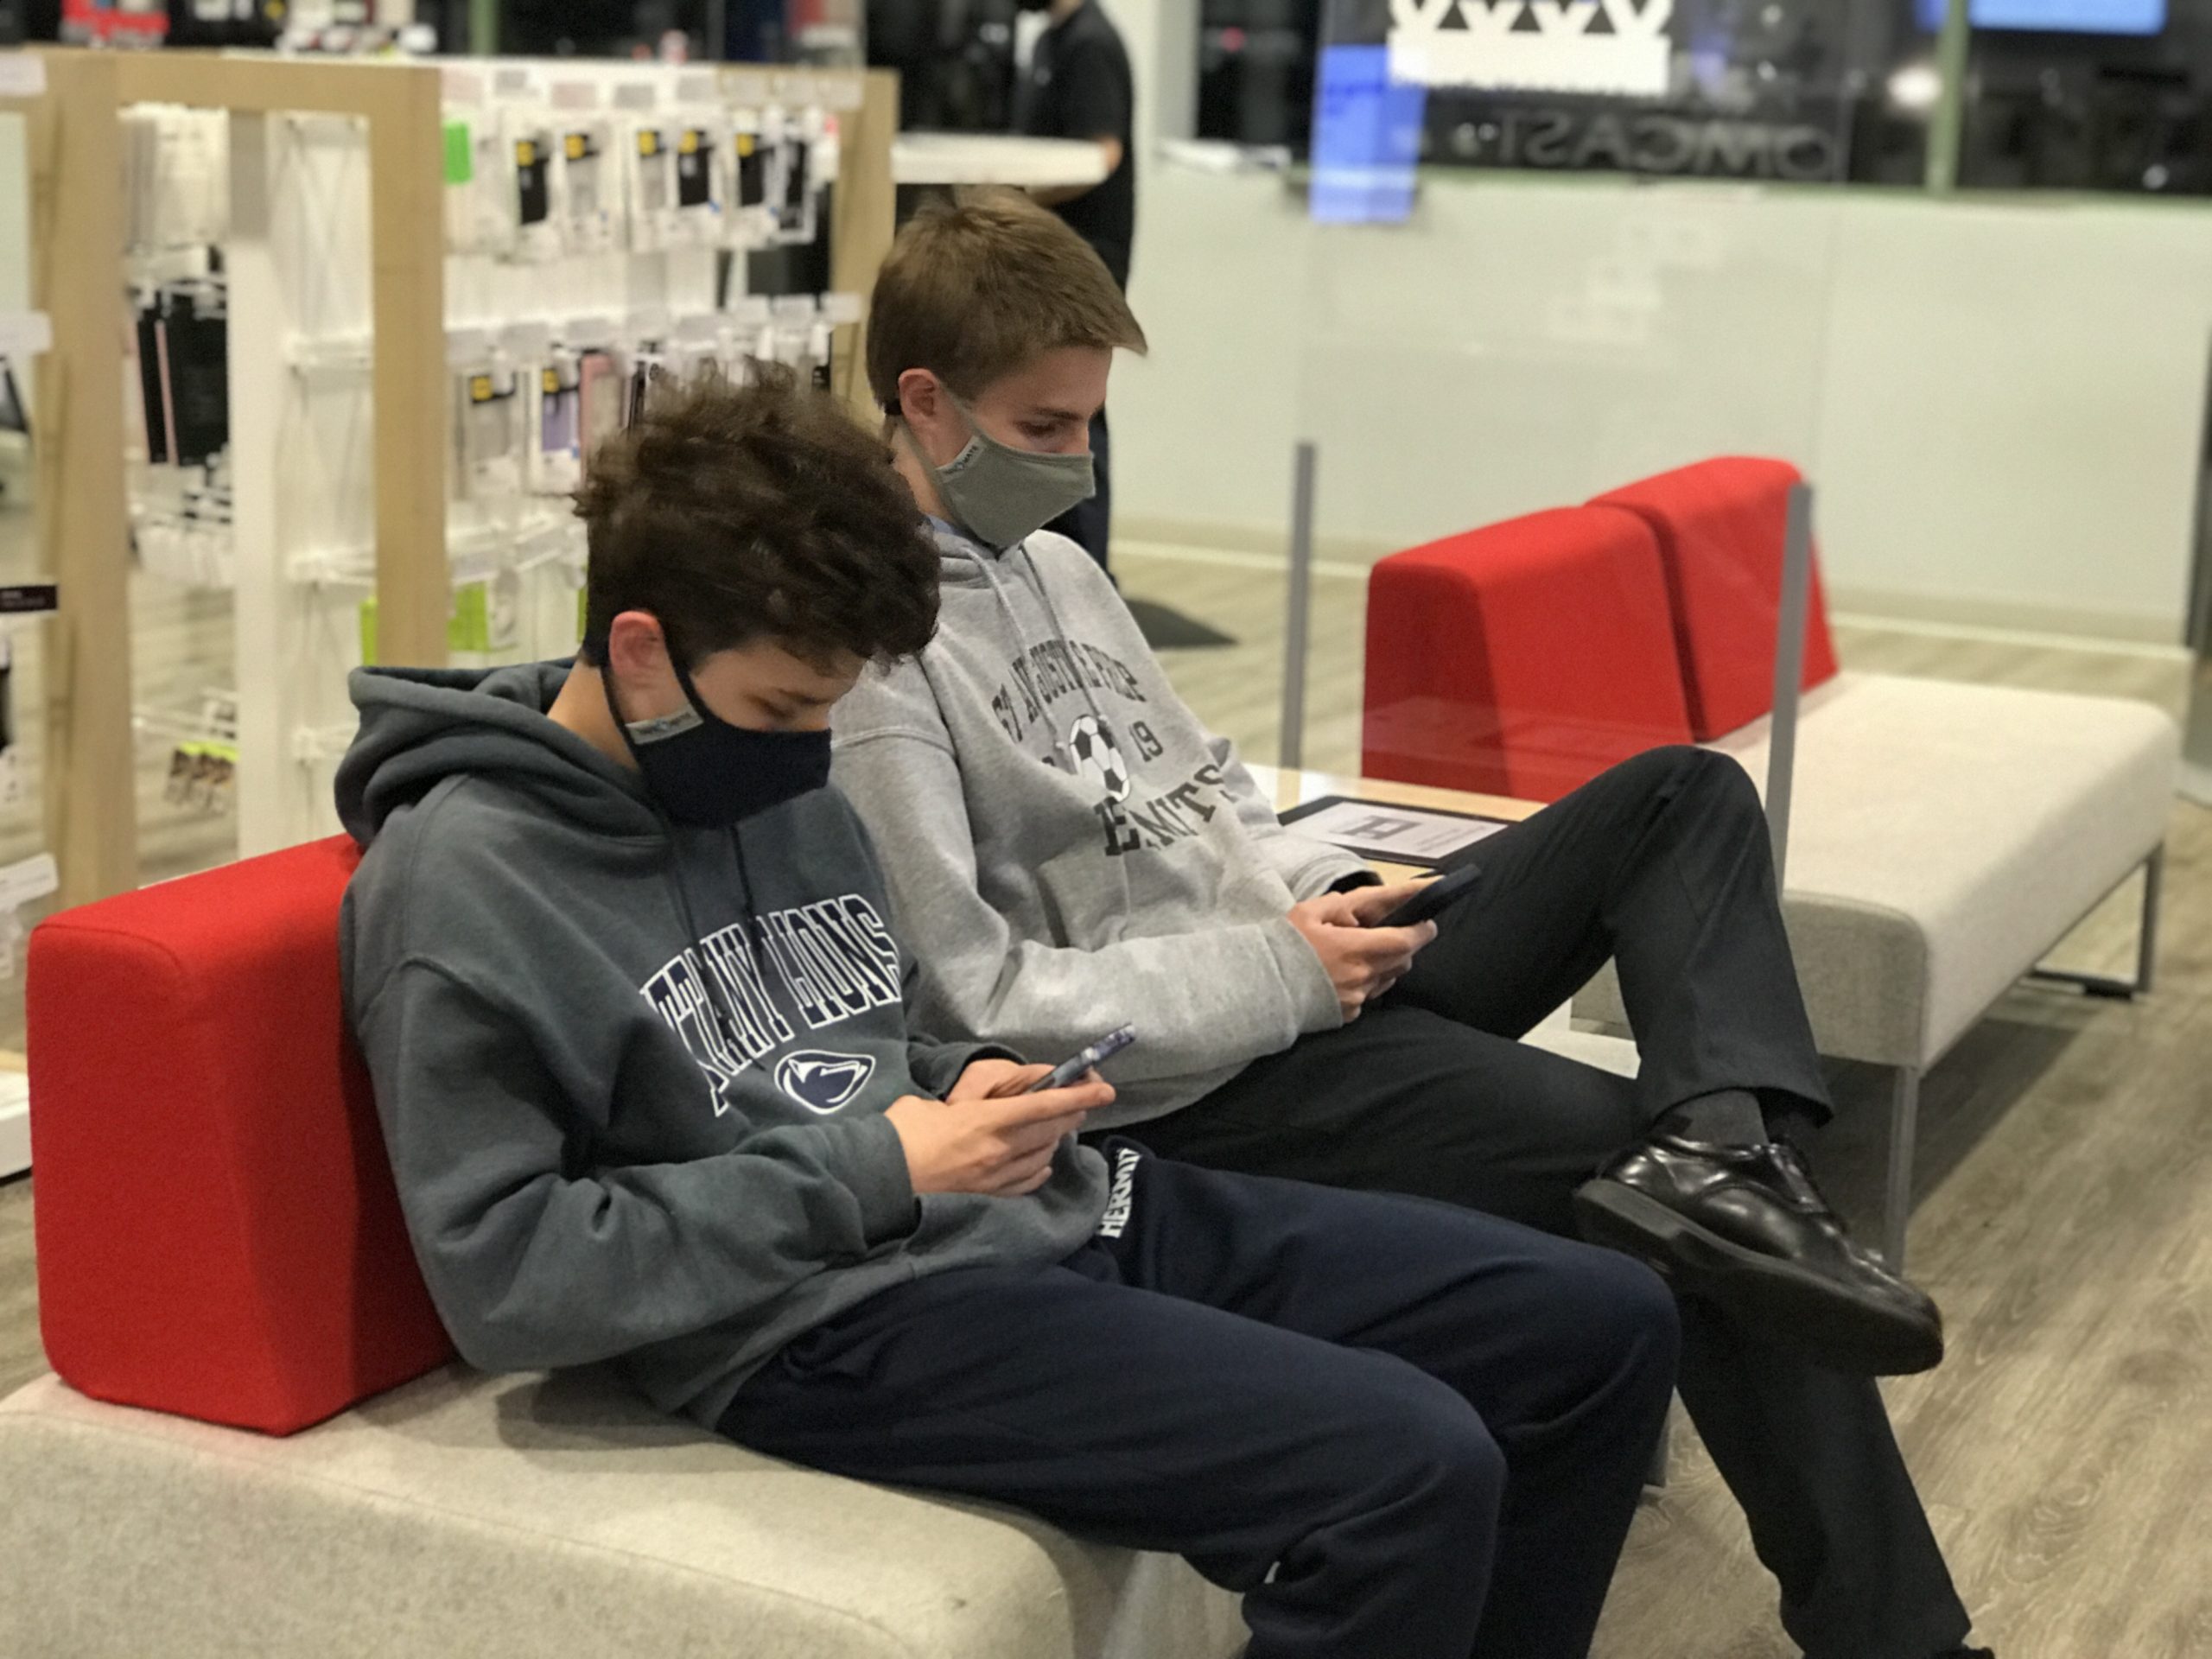 2 Teens look over iphones available as part of the Black Friday Xfinity Mobile Deals